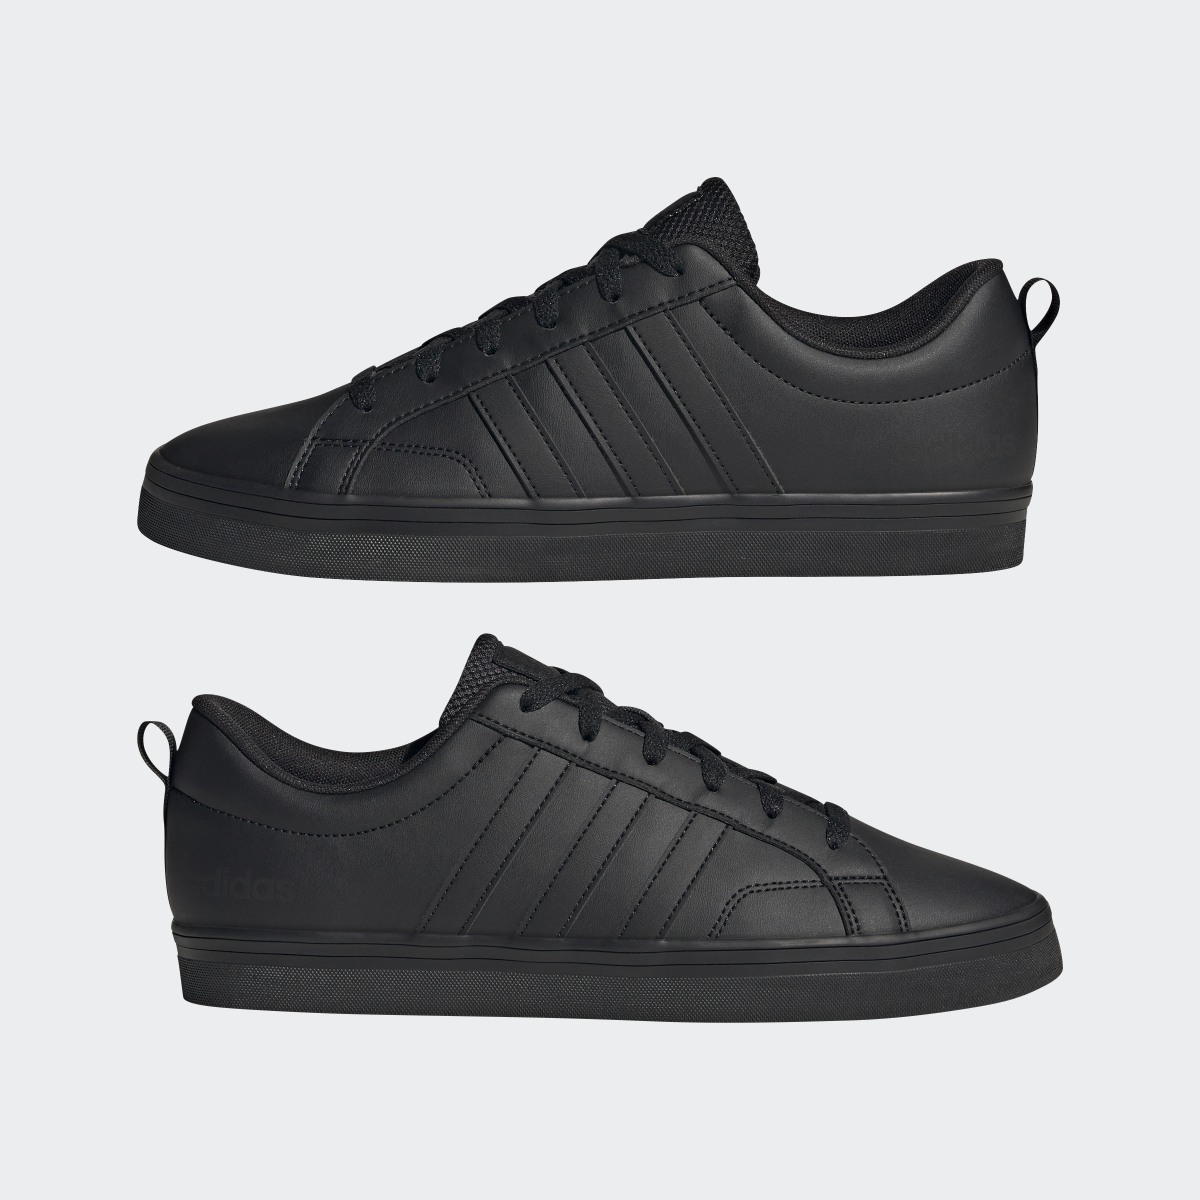 Adidas Chaussure VS Pace 2.0. 8